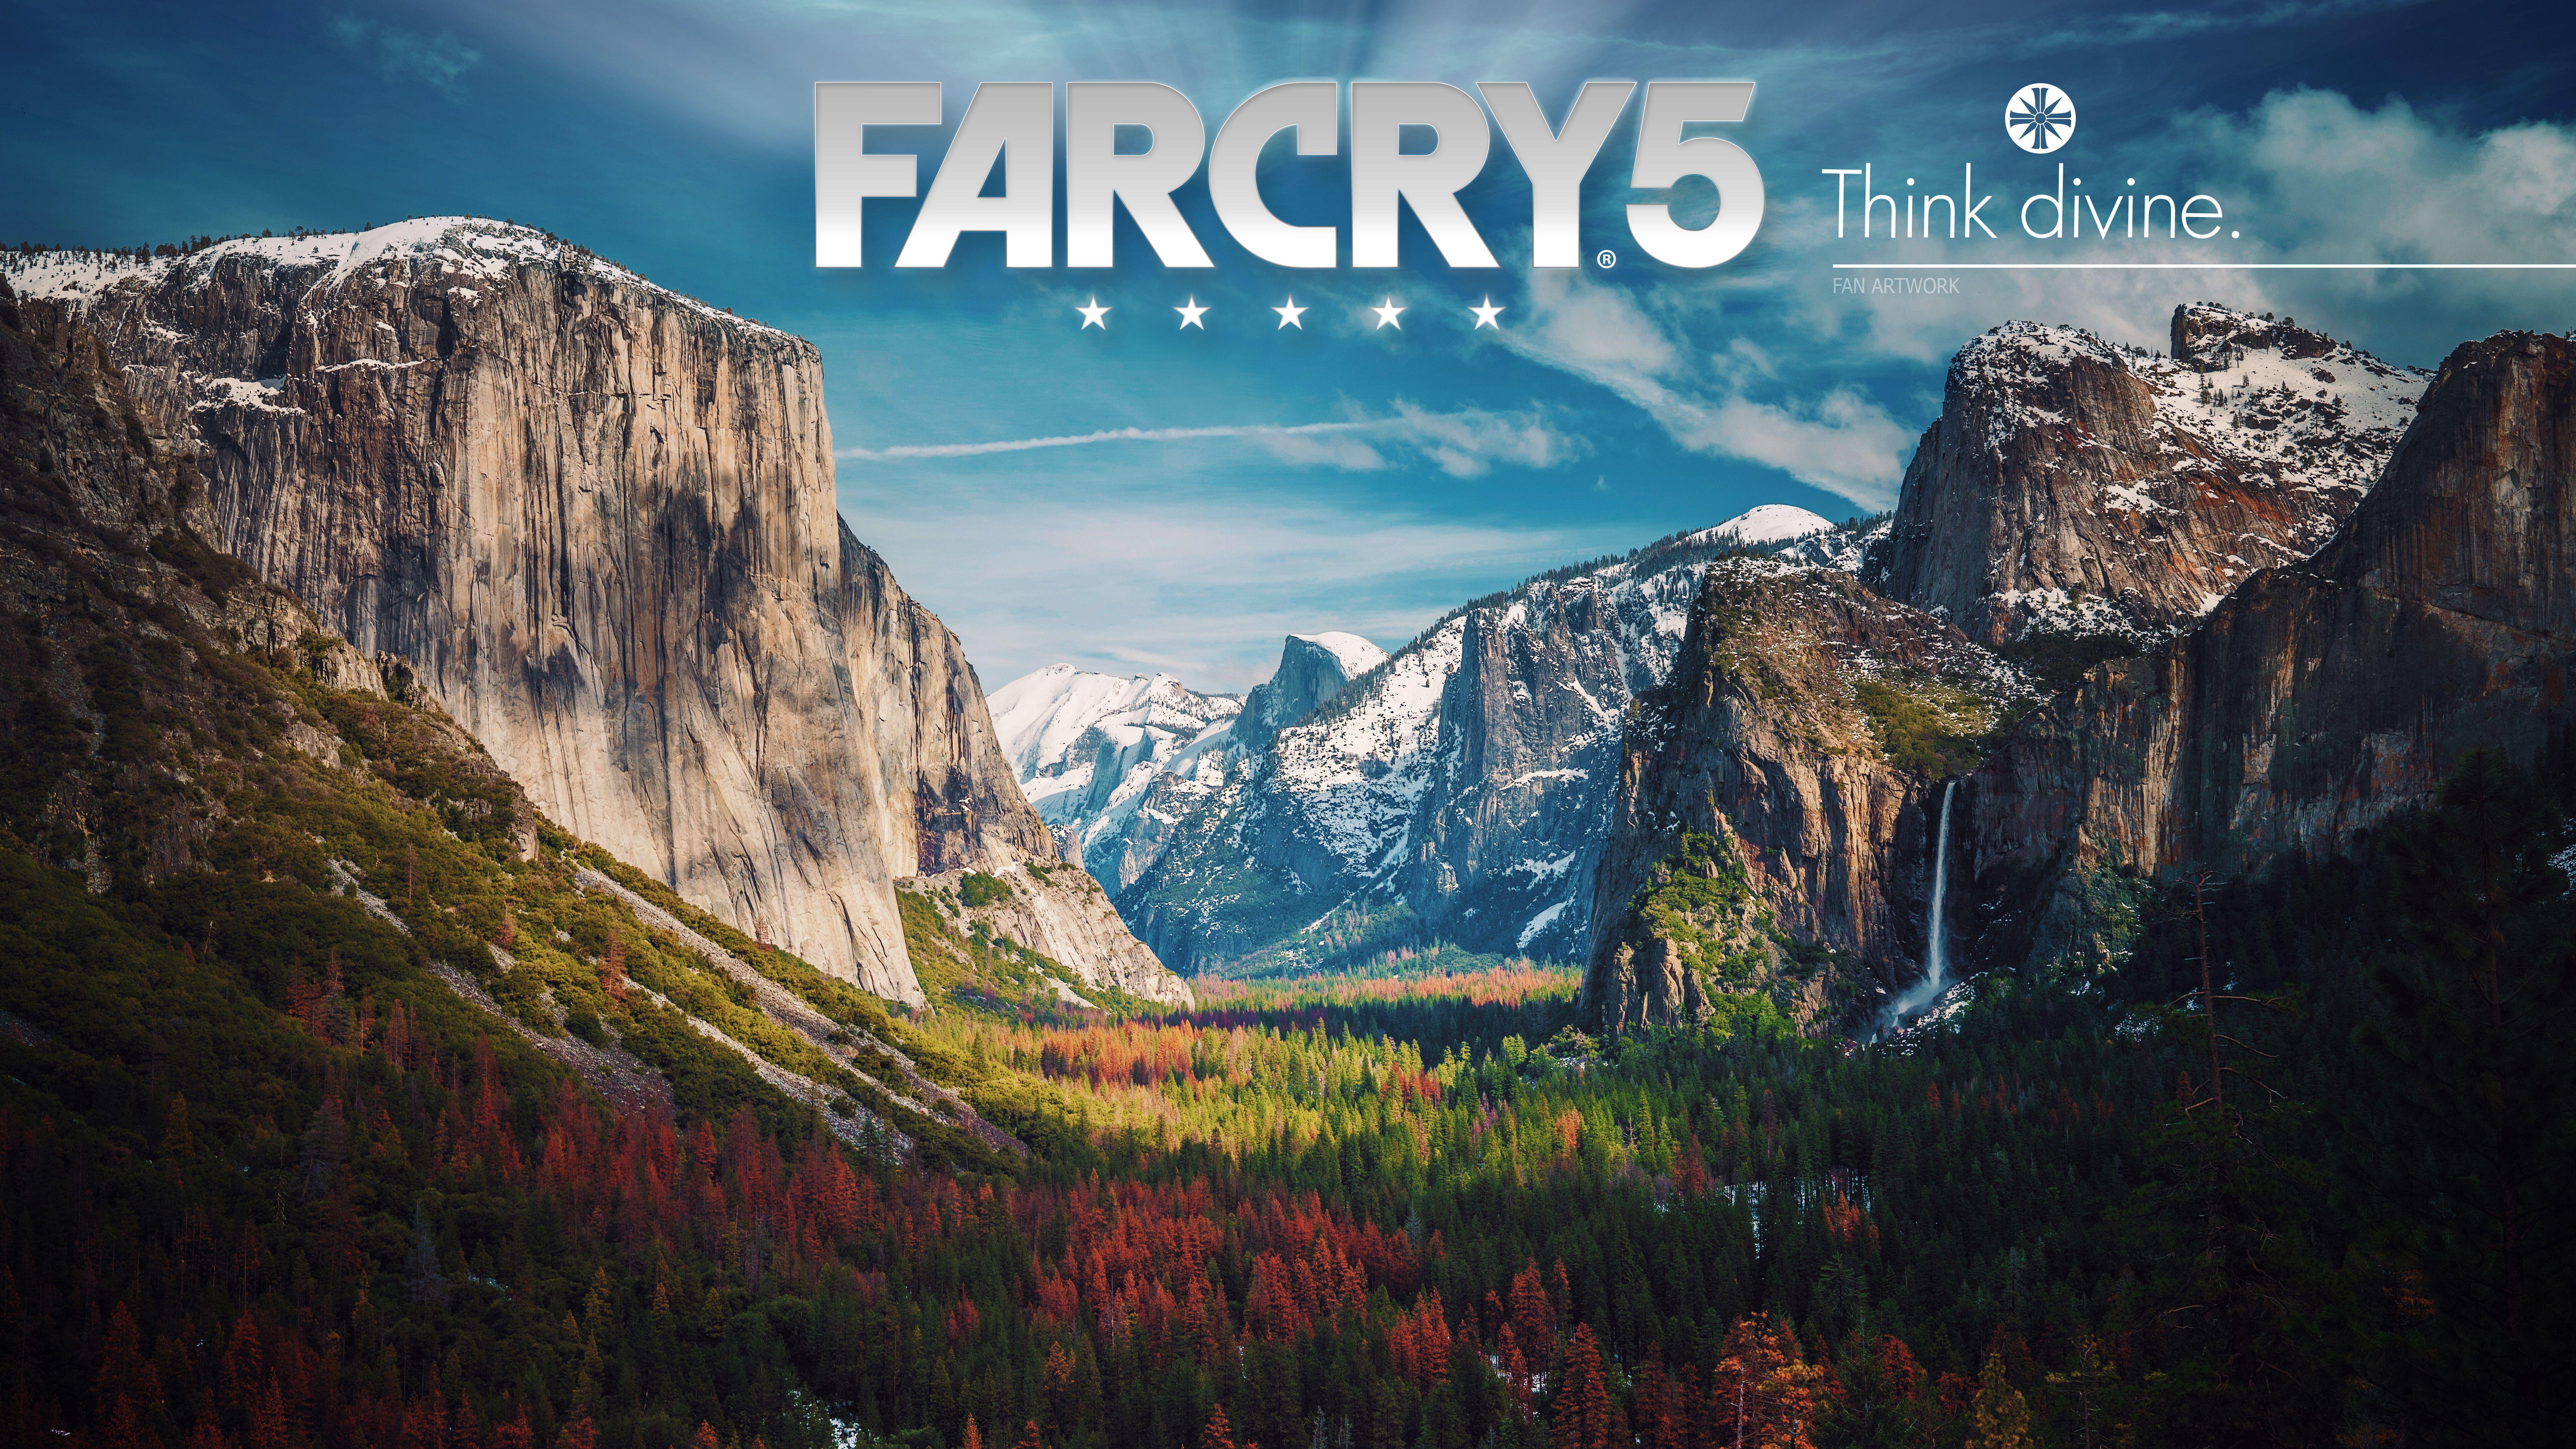 far cry 5 4k wallpapers wallpaper cave on far cry 5 4k wallpapers